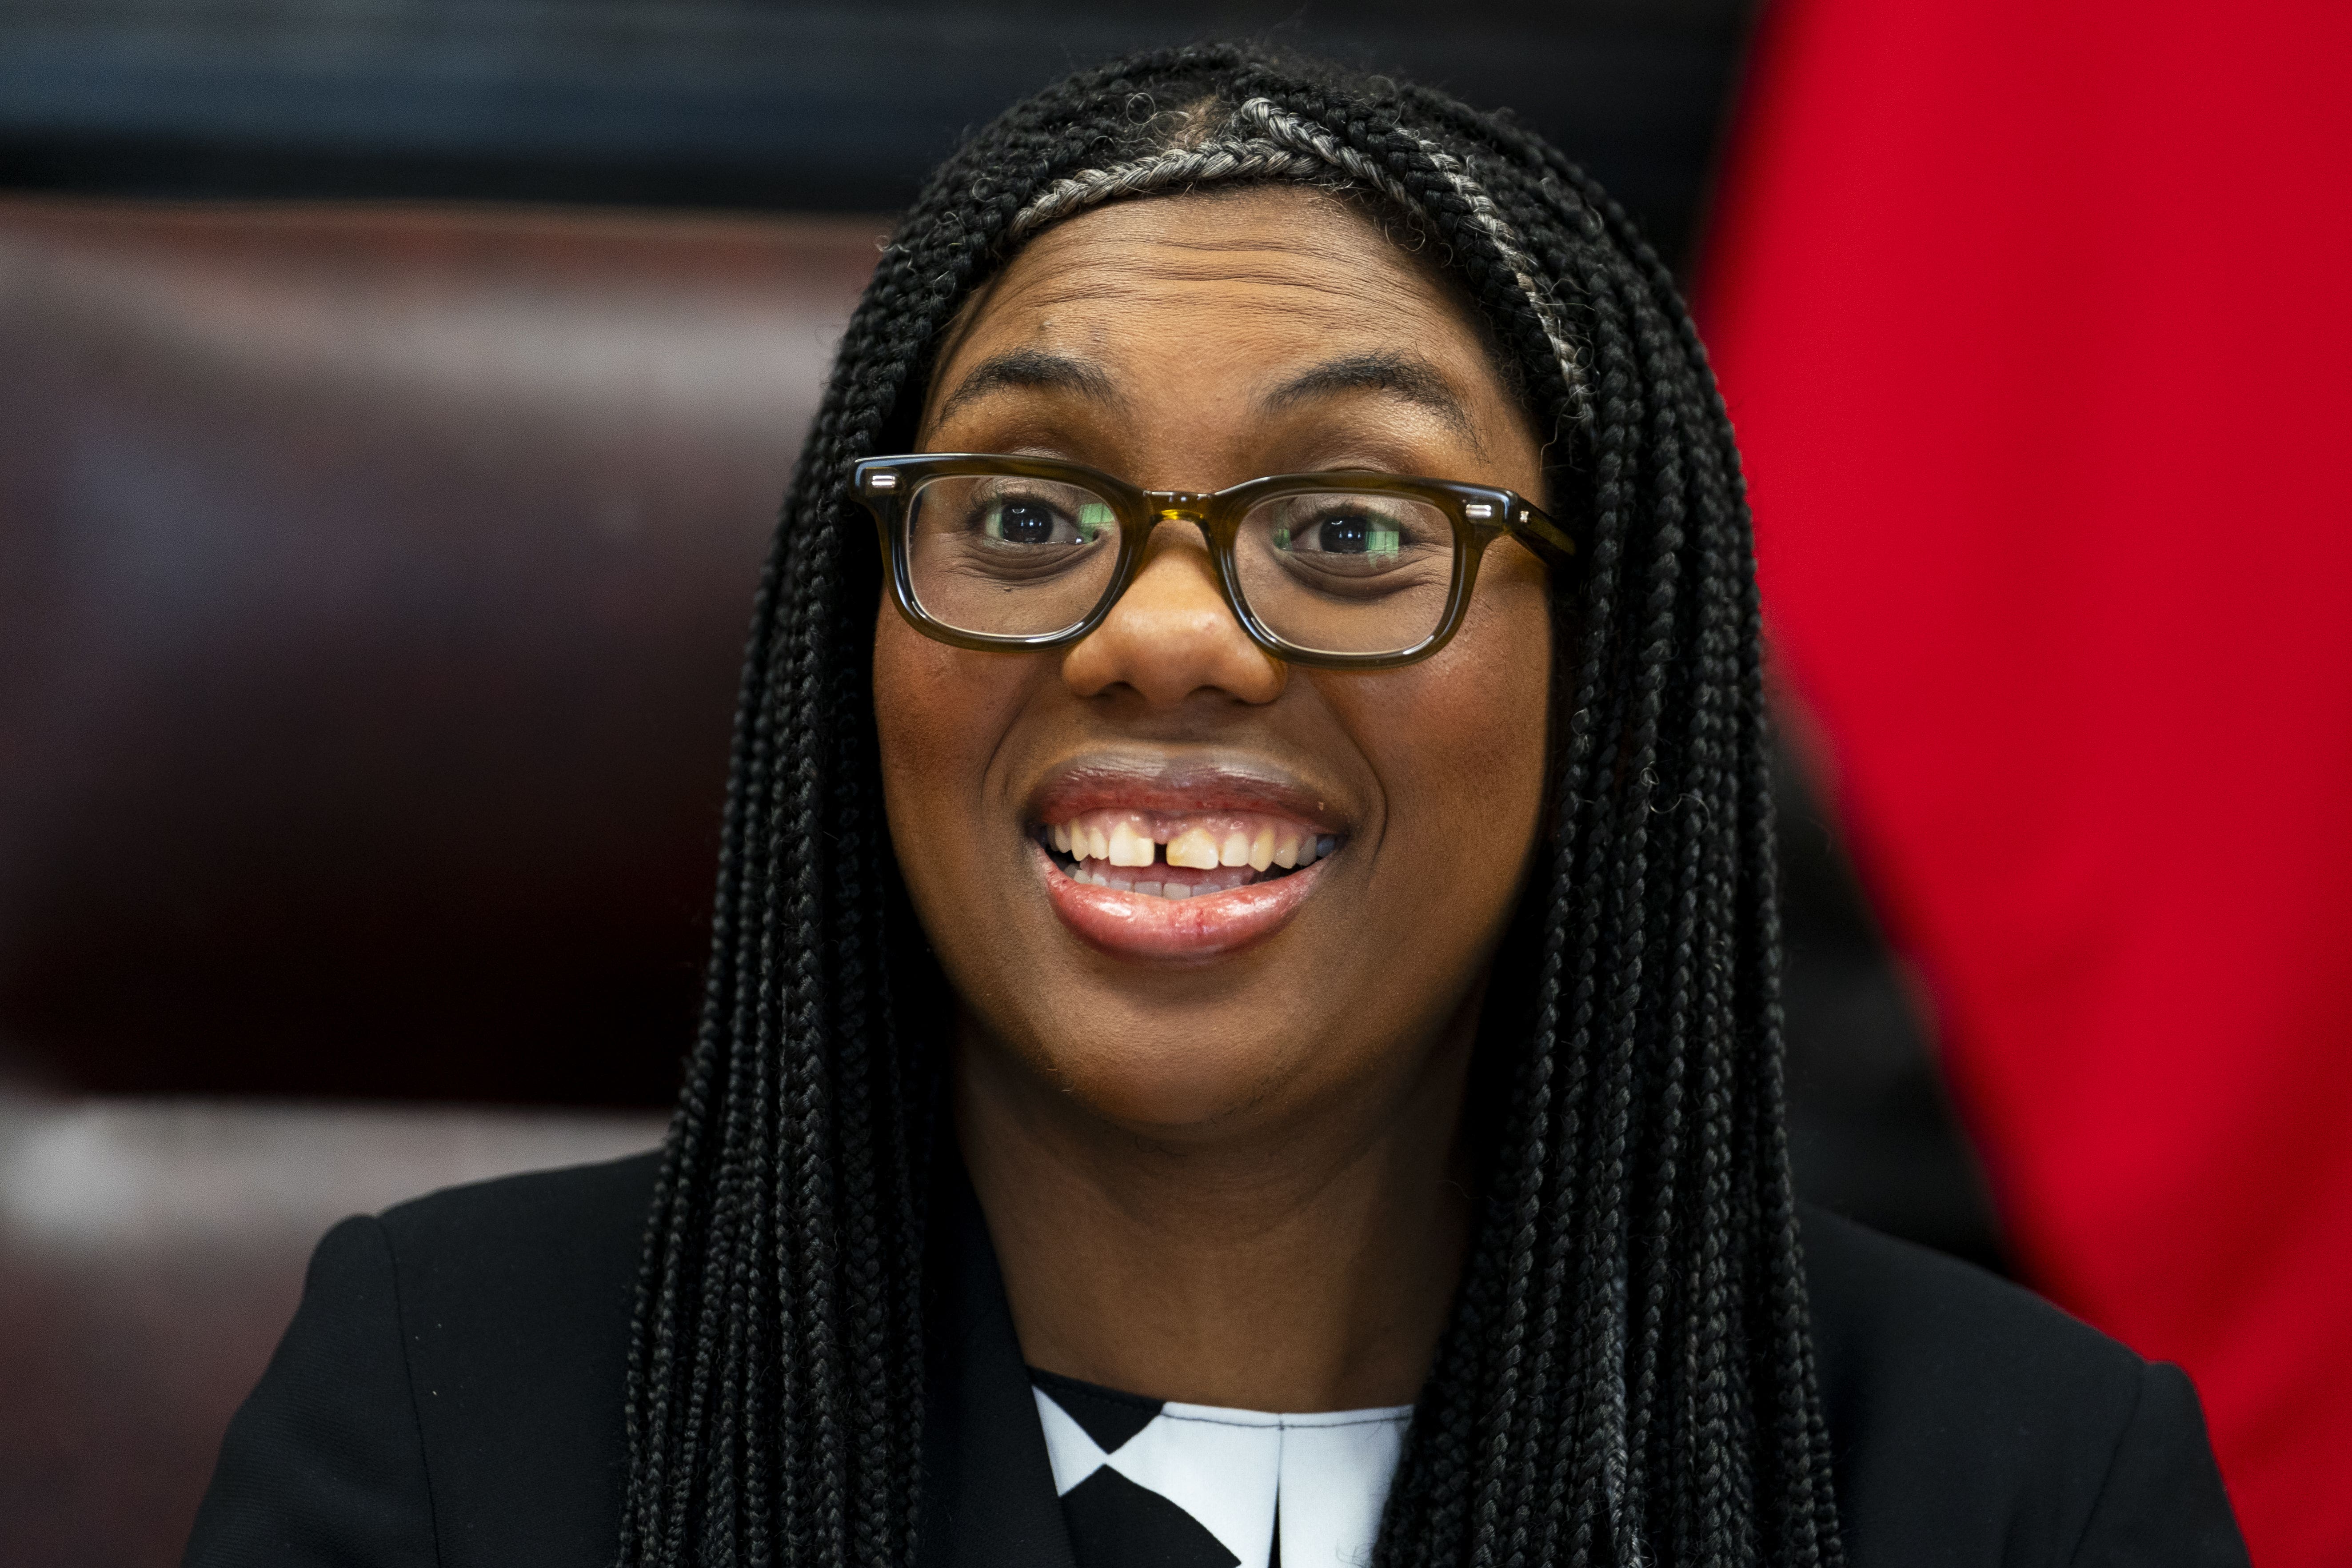 Kemi Badenoch told her colleagues to ‘stop messing around and get behind the prime minister’